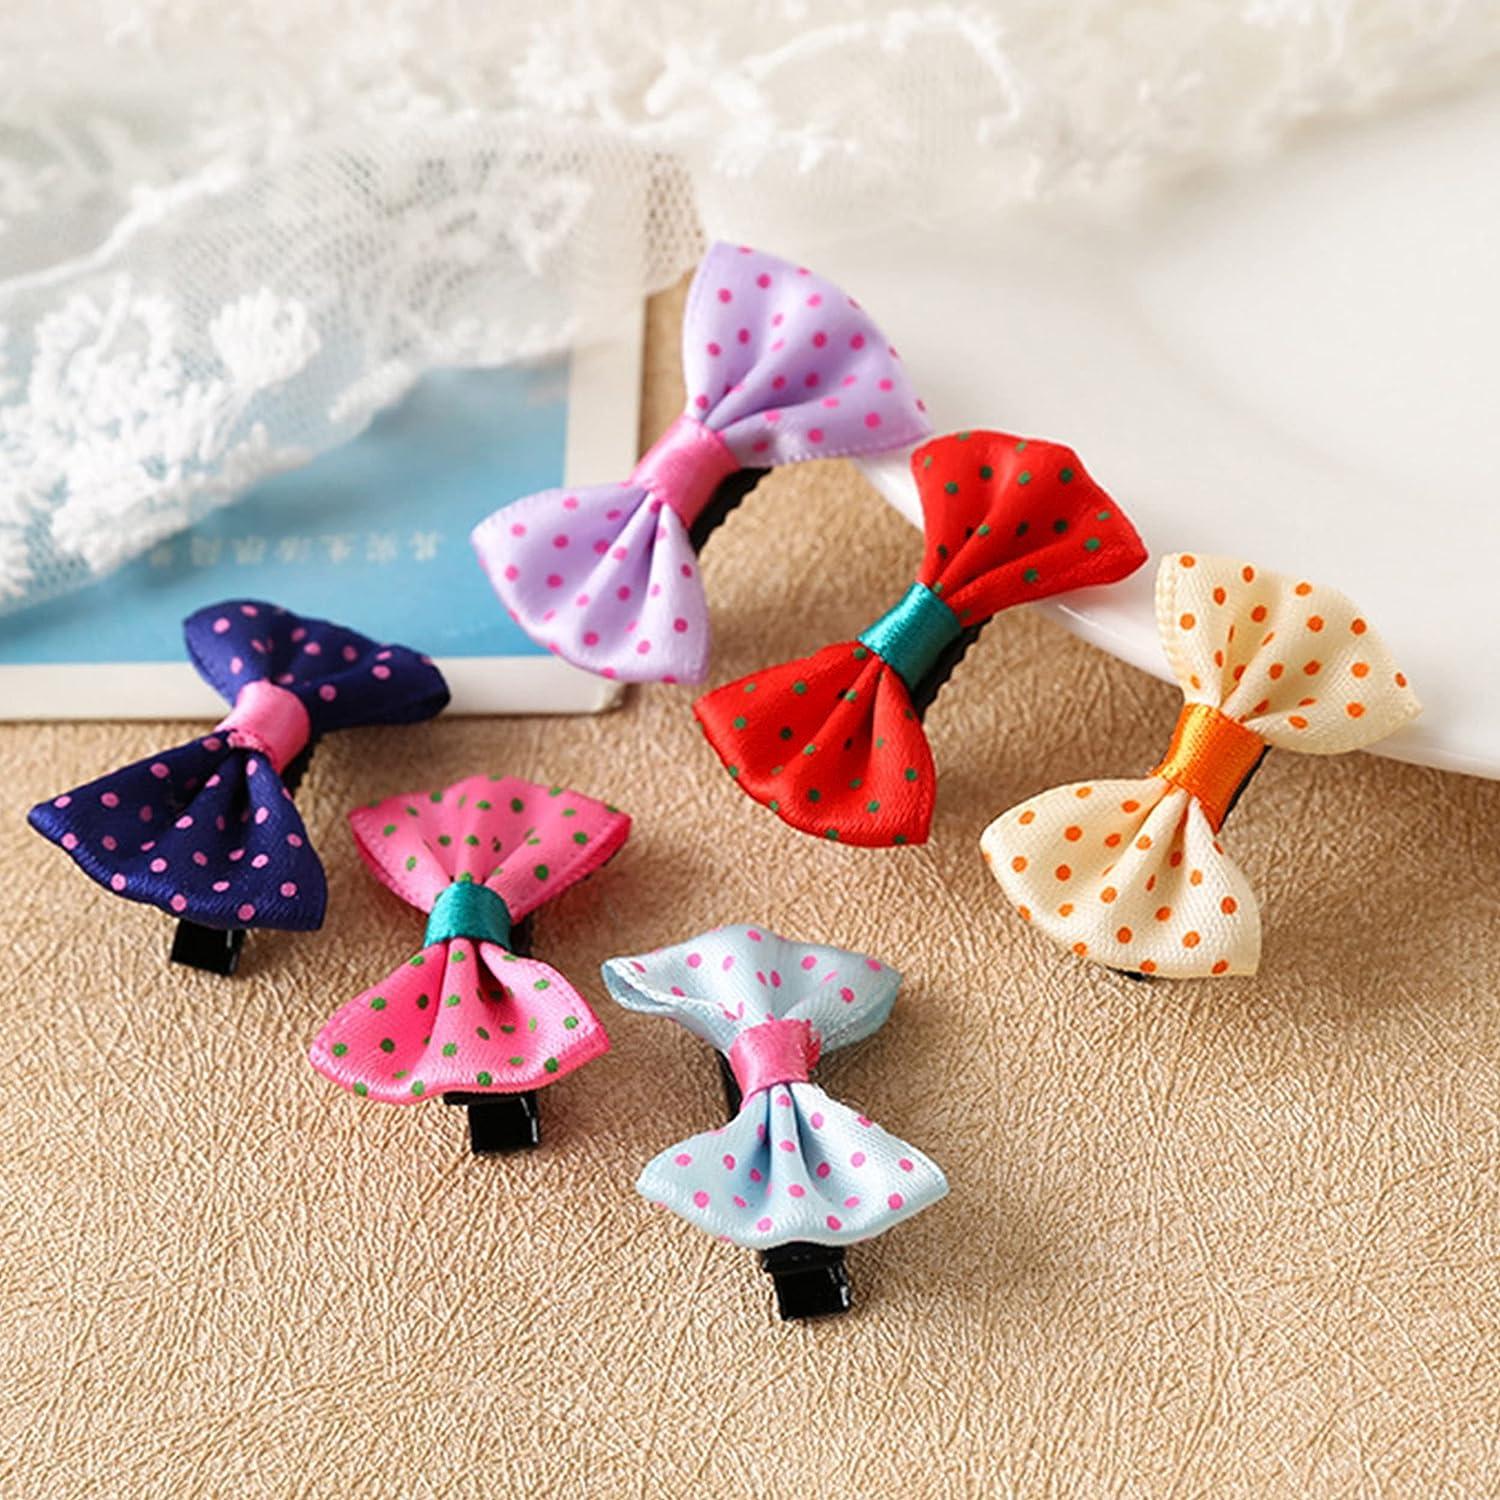 60pcs Ribbon Bows Bowknot Flower Handmade Bright Color Hair Bows  Accessories for Girls Red